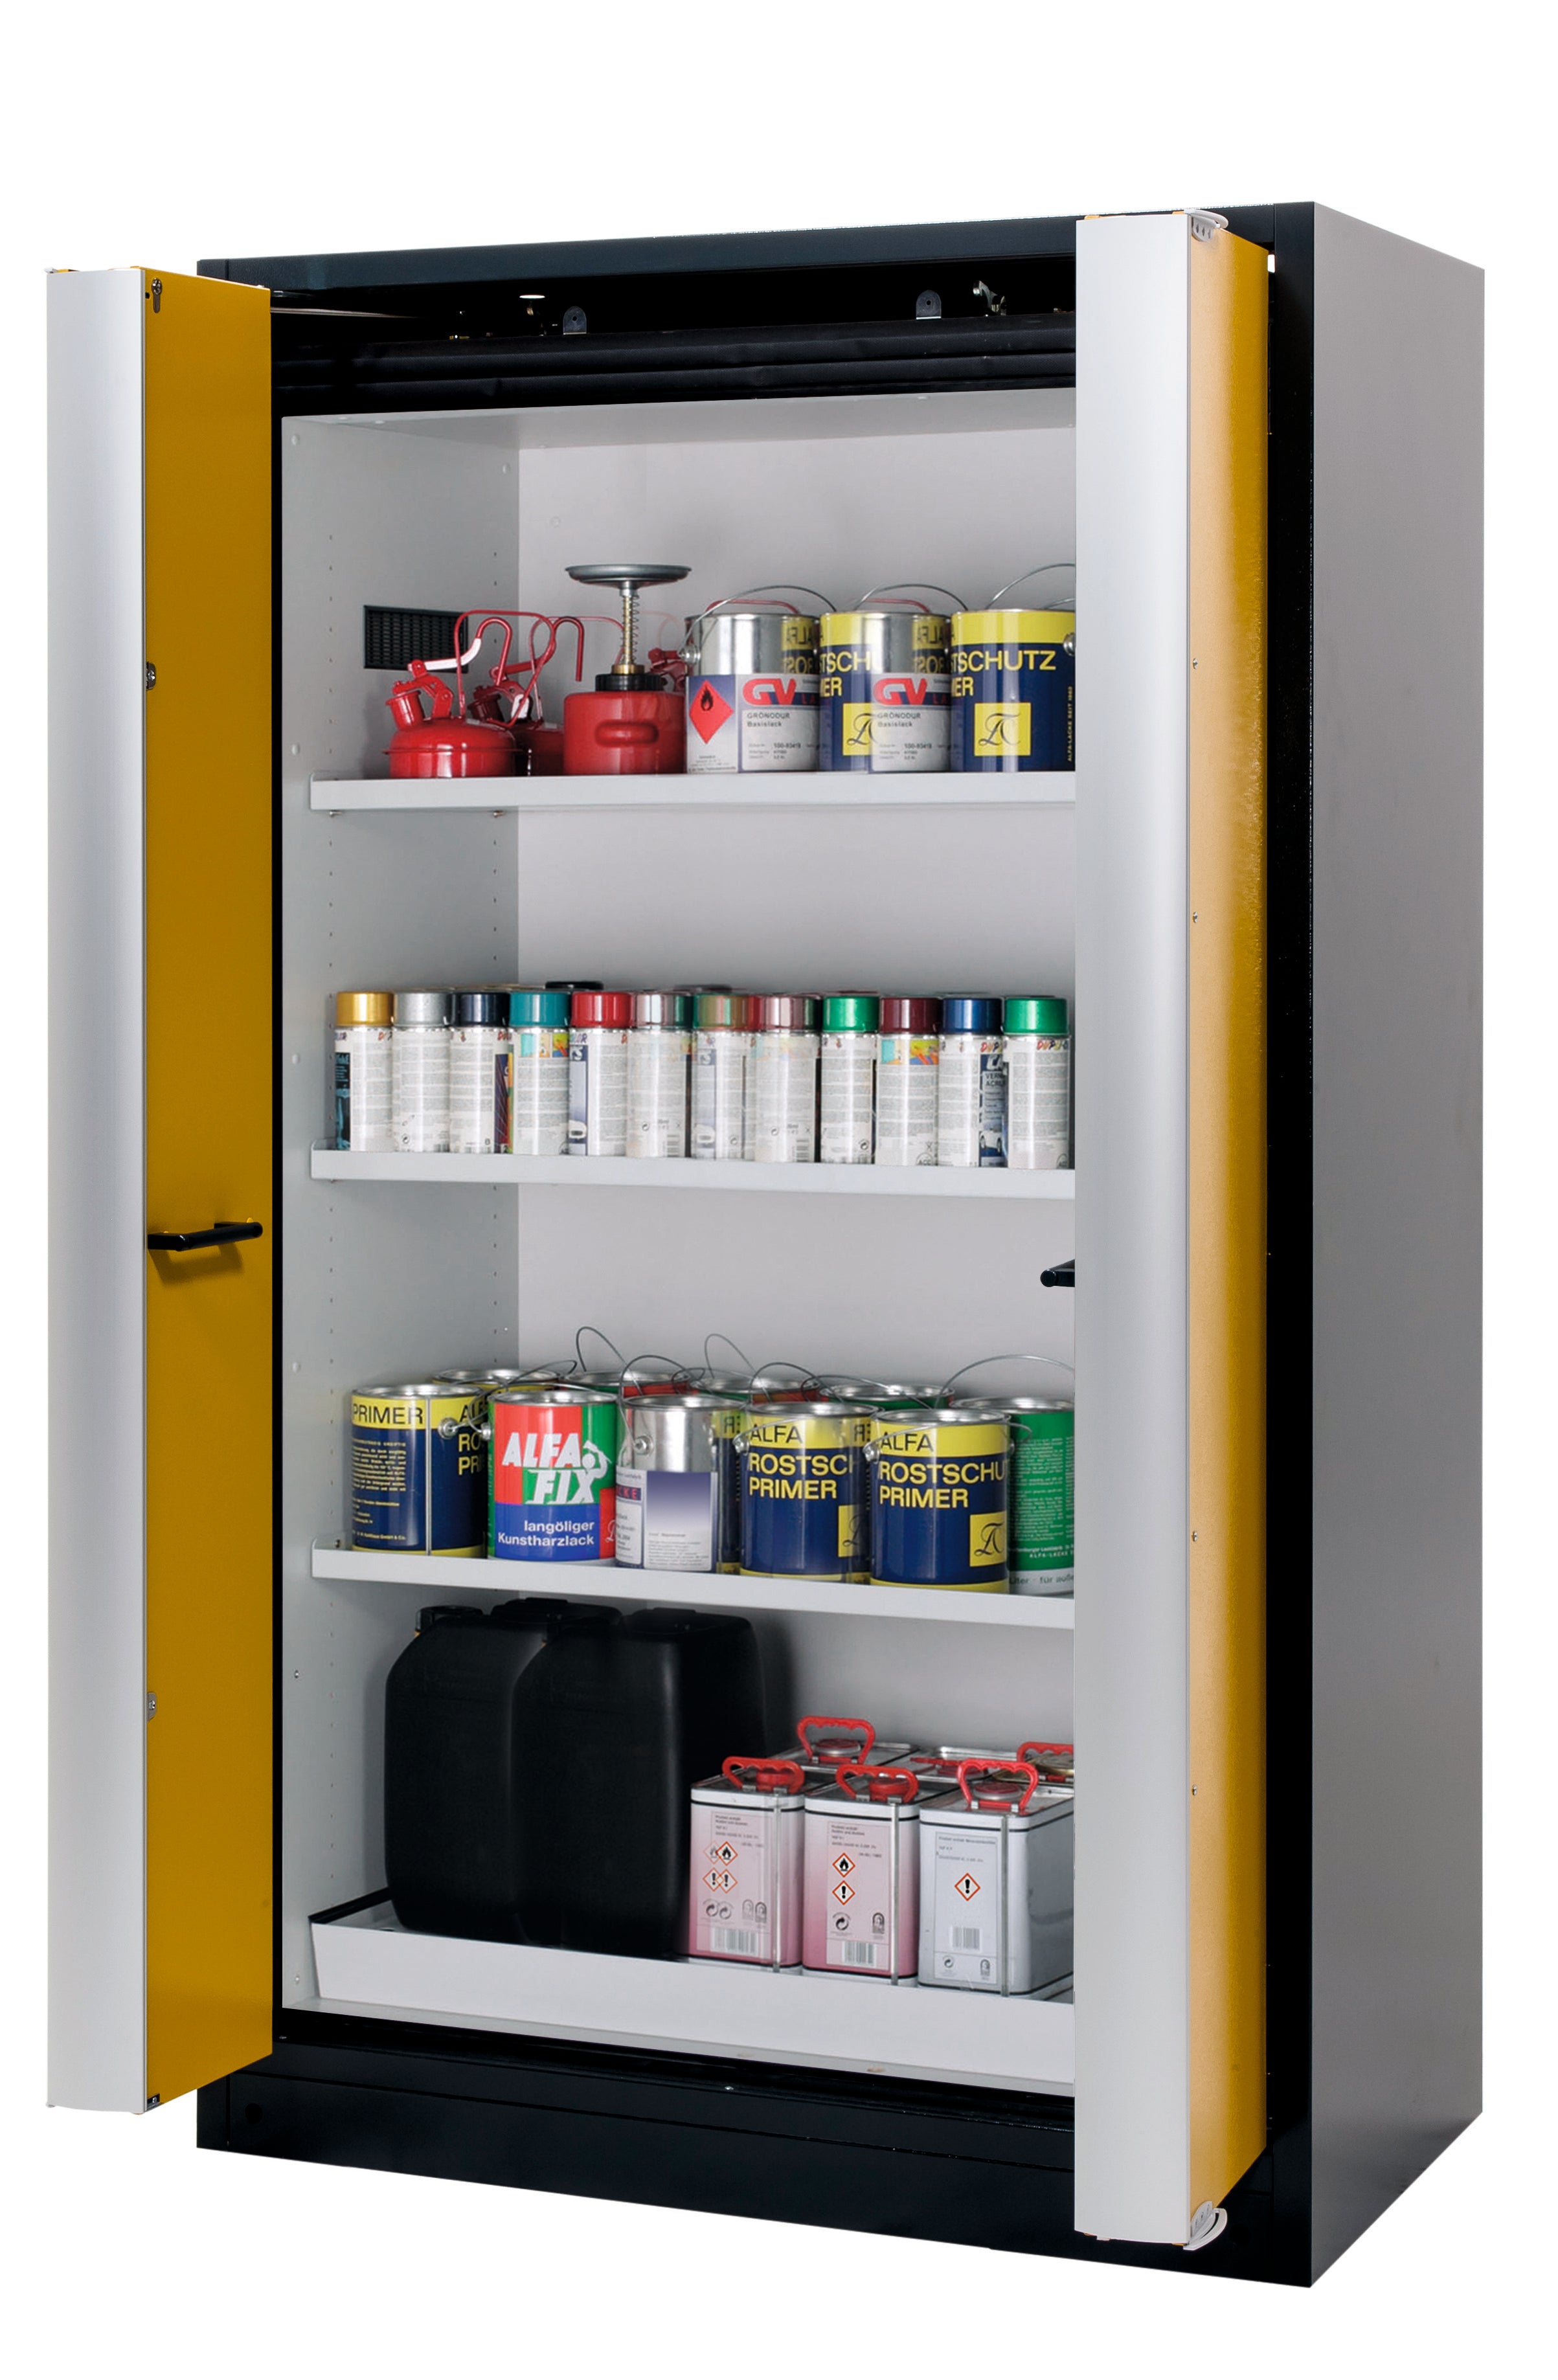 Type 90 safety cabinet Q-PHOENIX-90 model Q90.195.120.FD in safety yellow RAL 1004 with 3x standard shelves (sheet steel)